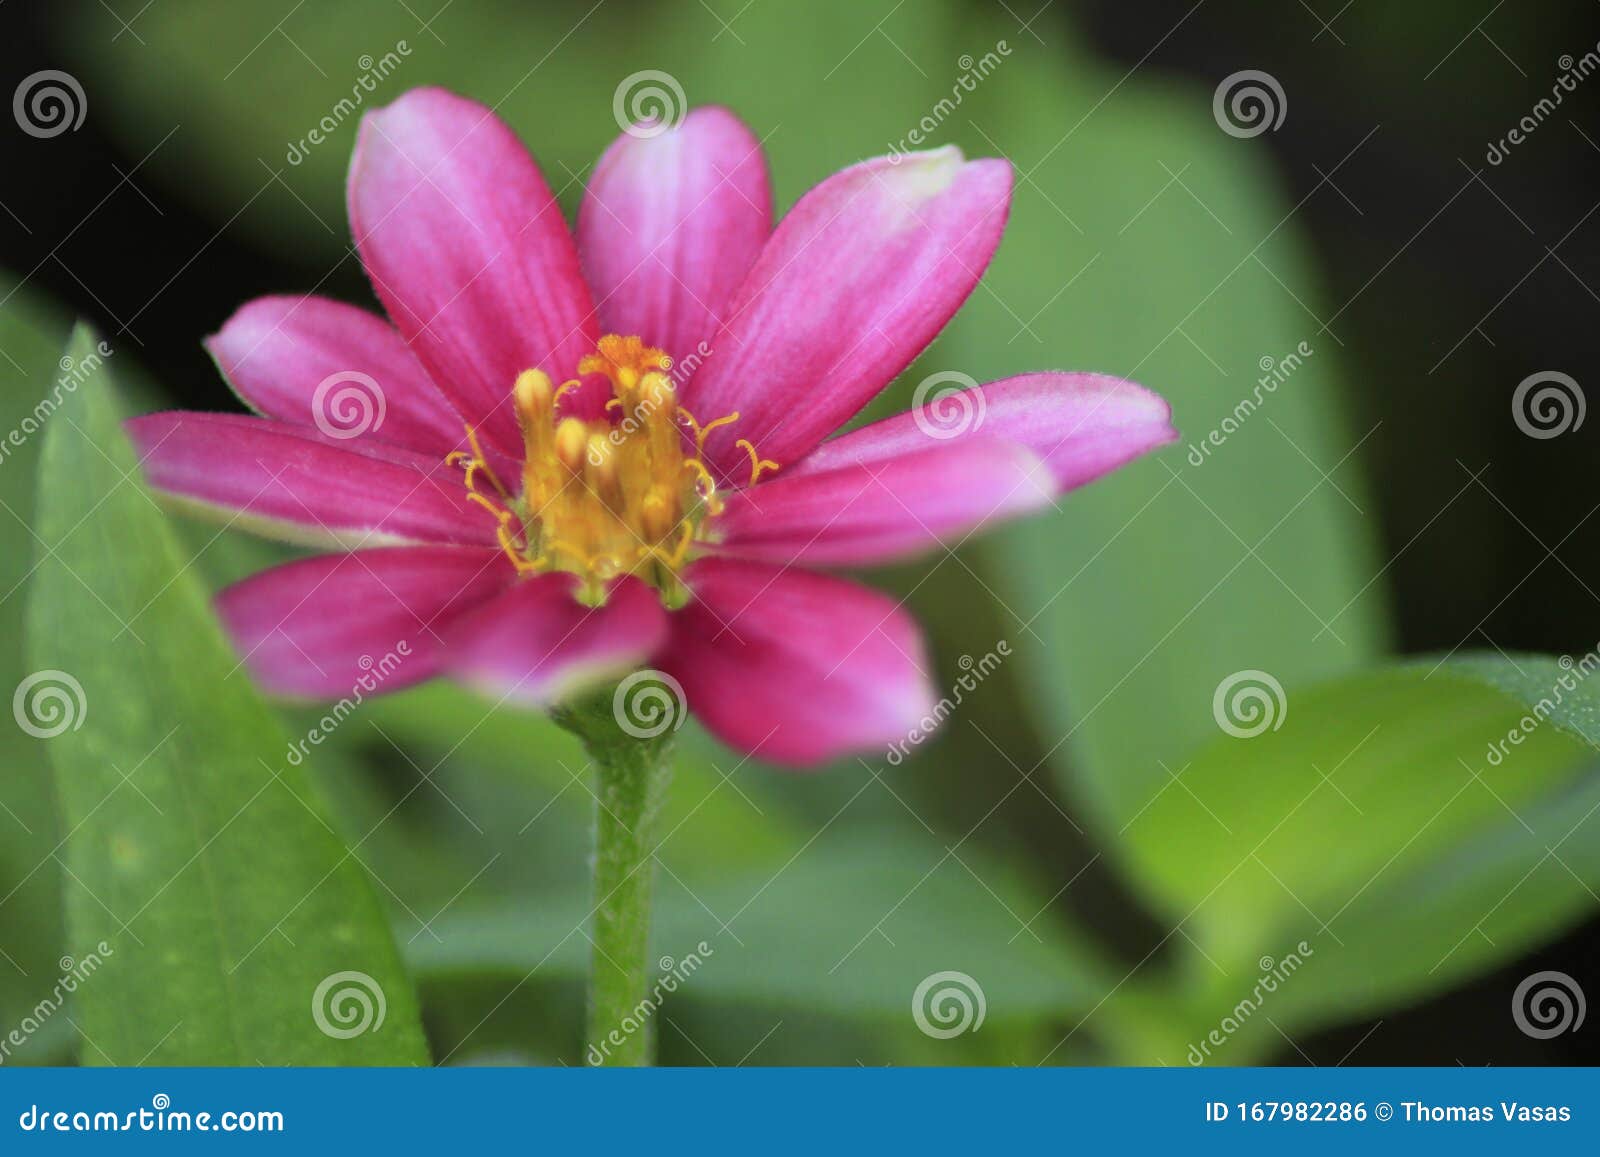 The Red Burgandy Flower In The Gardens Stock Photo Image Of